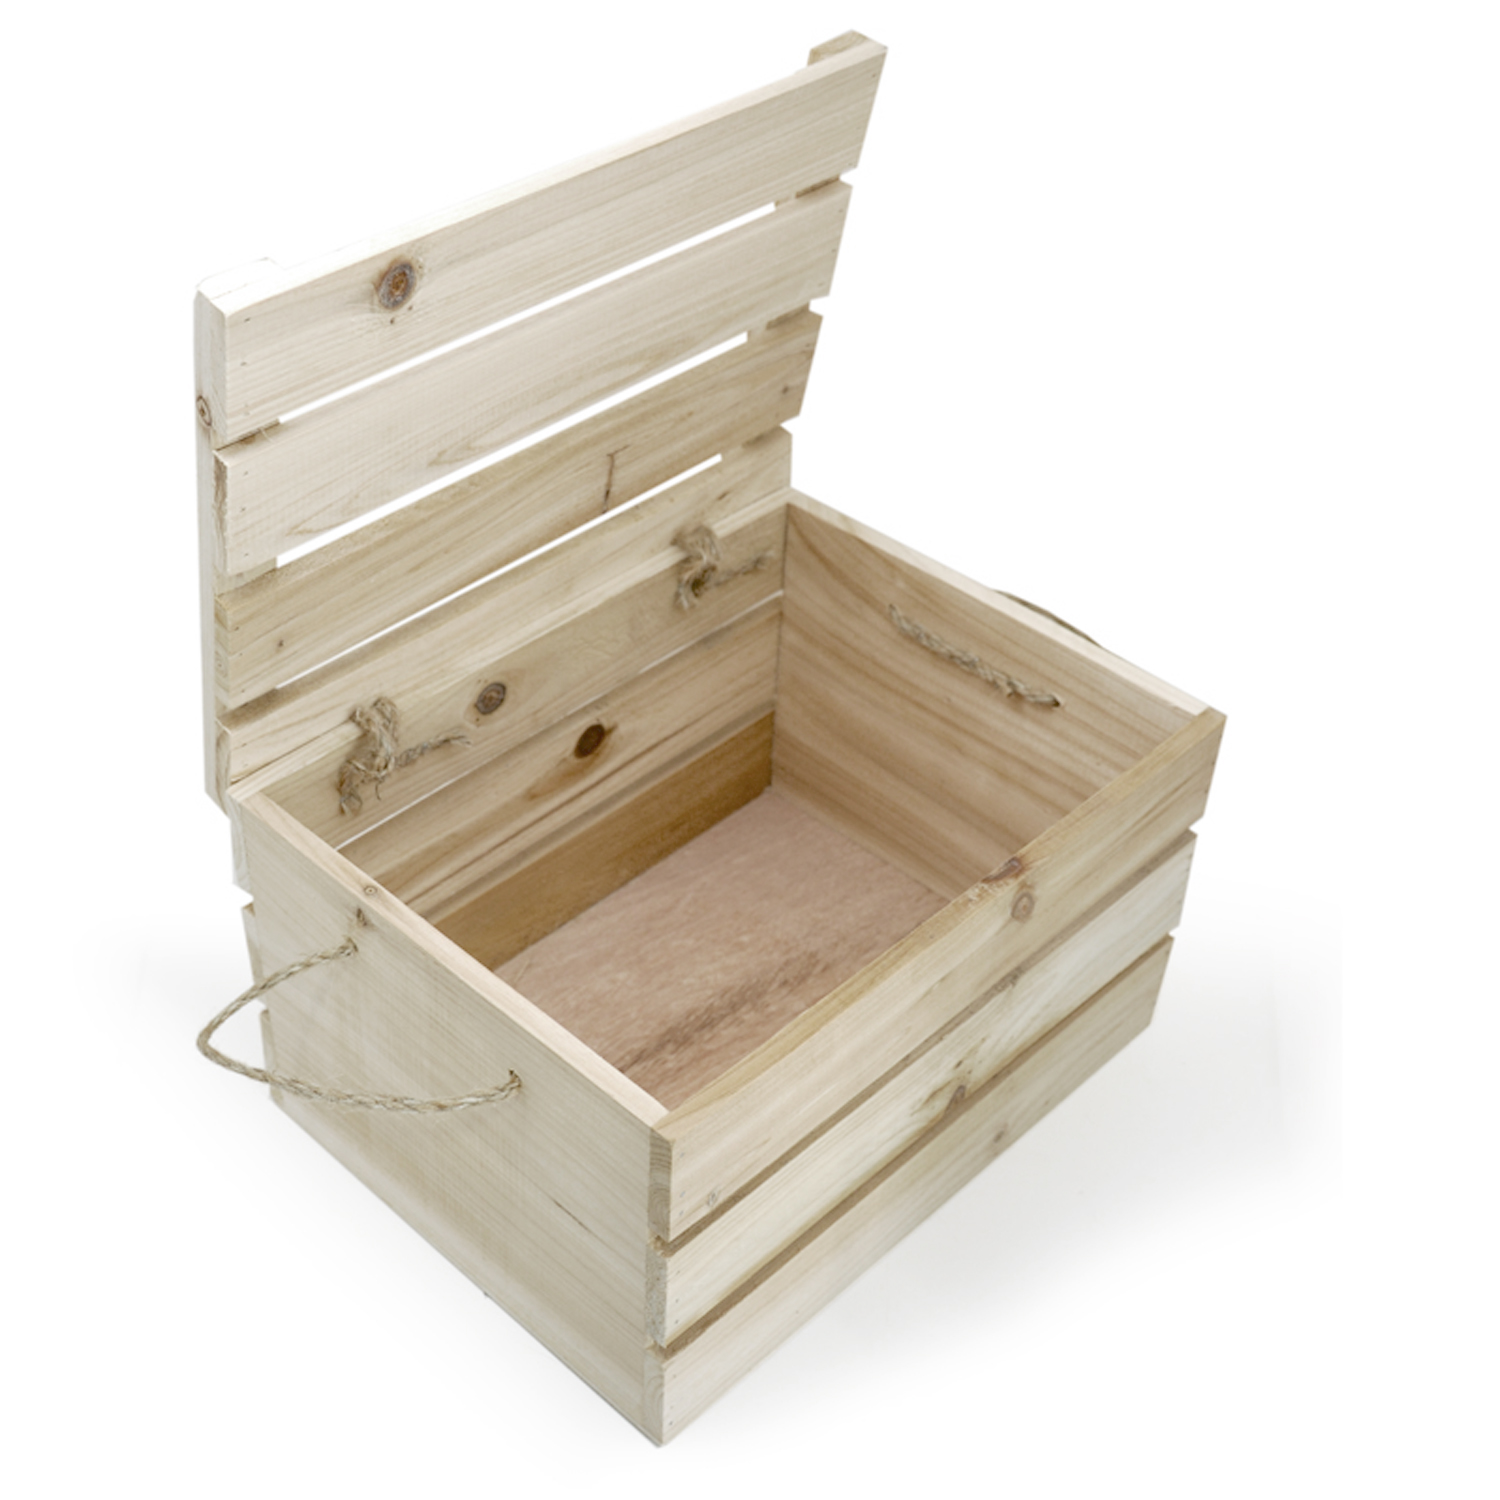 The Lucky Clover Trading Wood Crate Storage Box with Swing Lid, 11 L